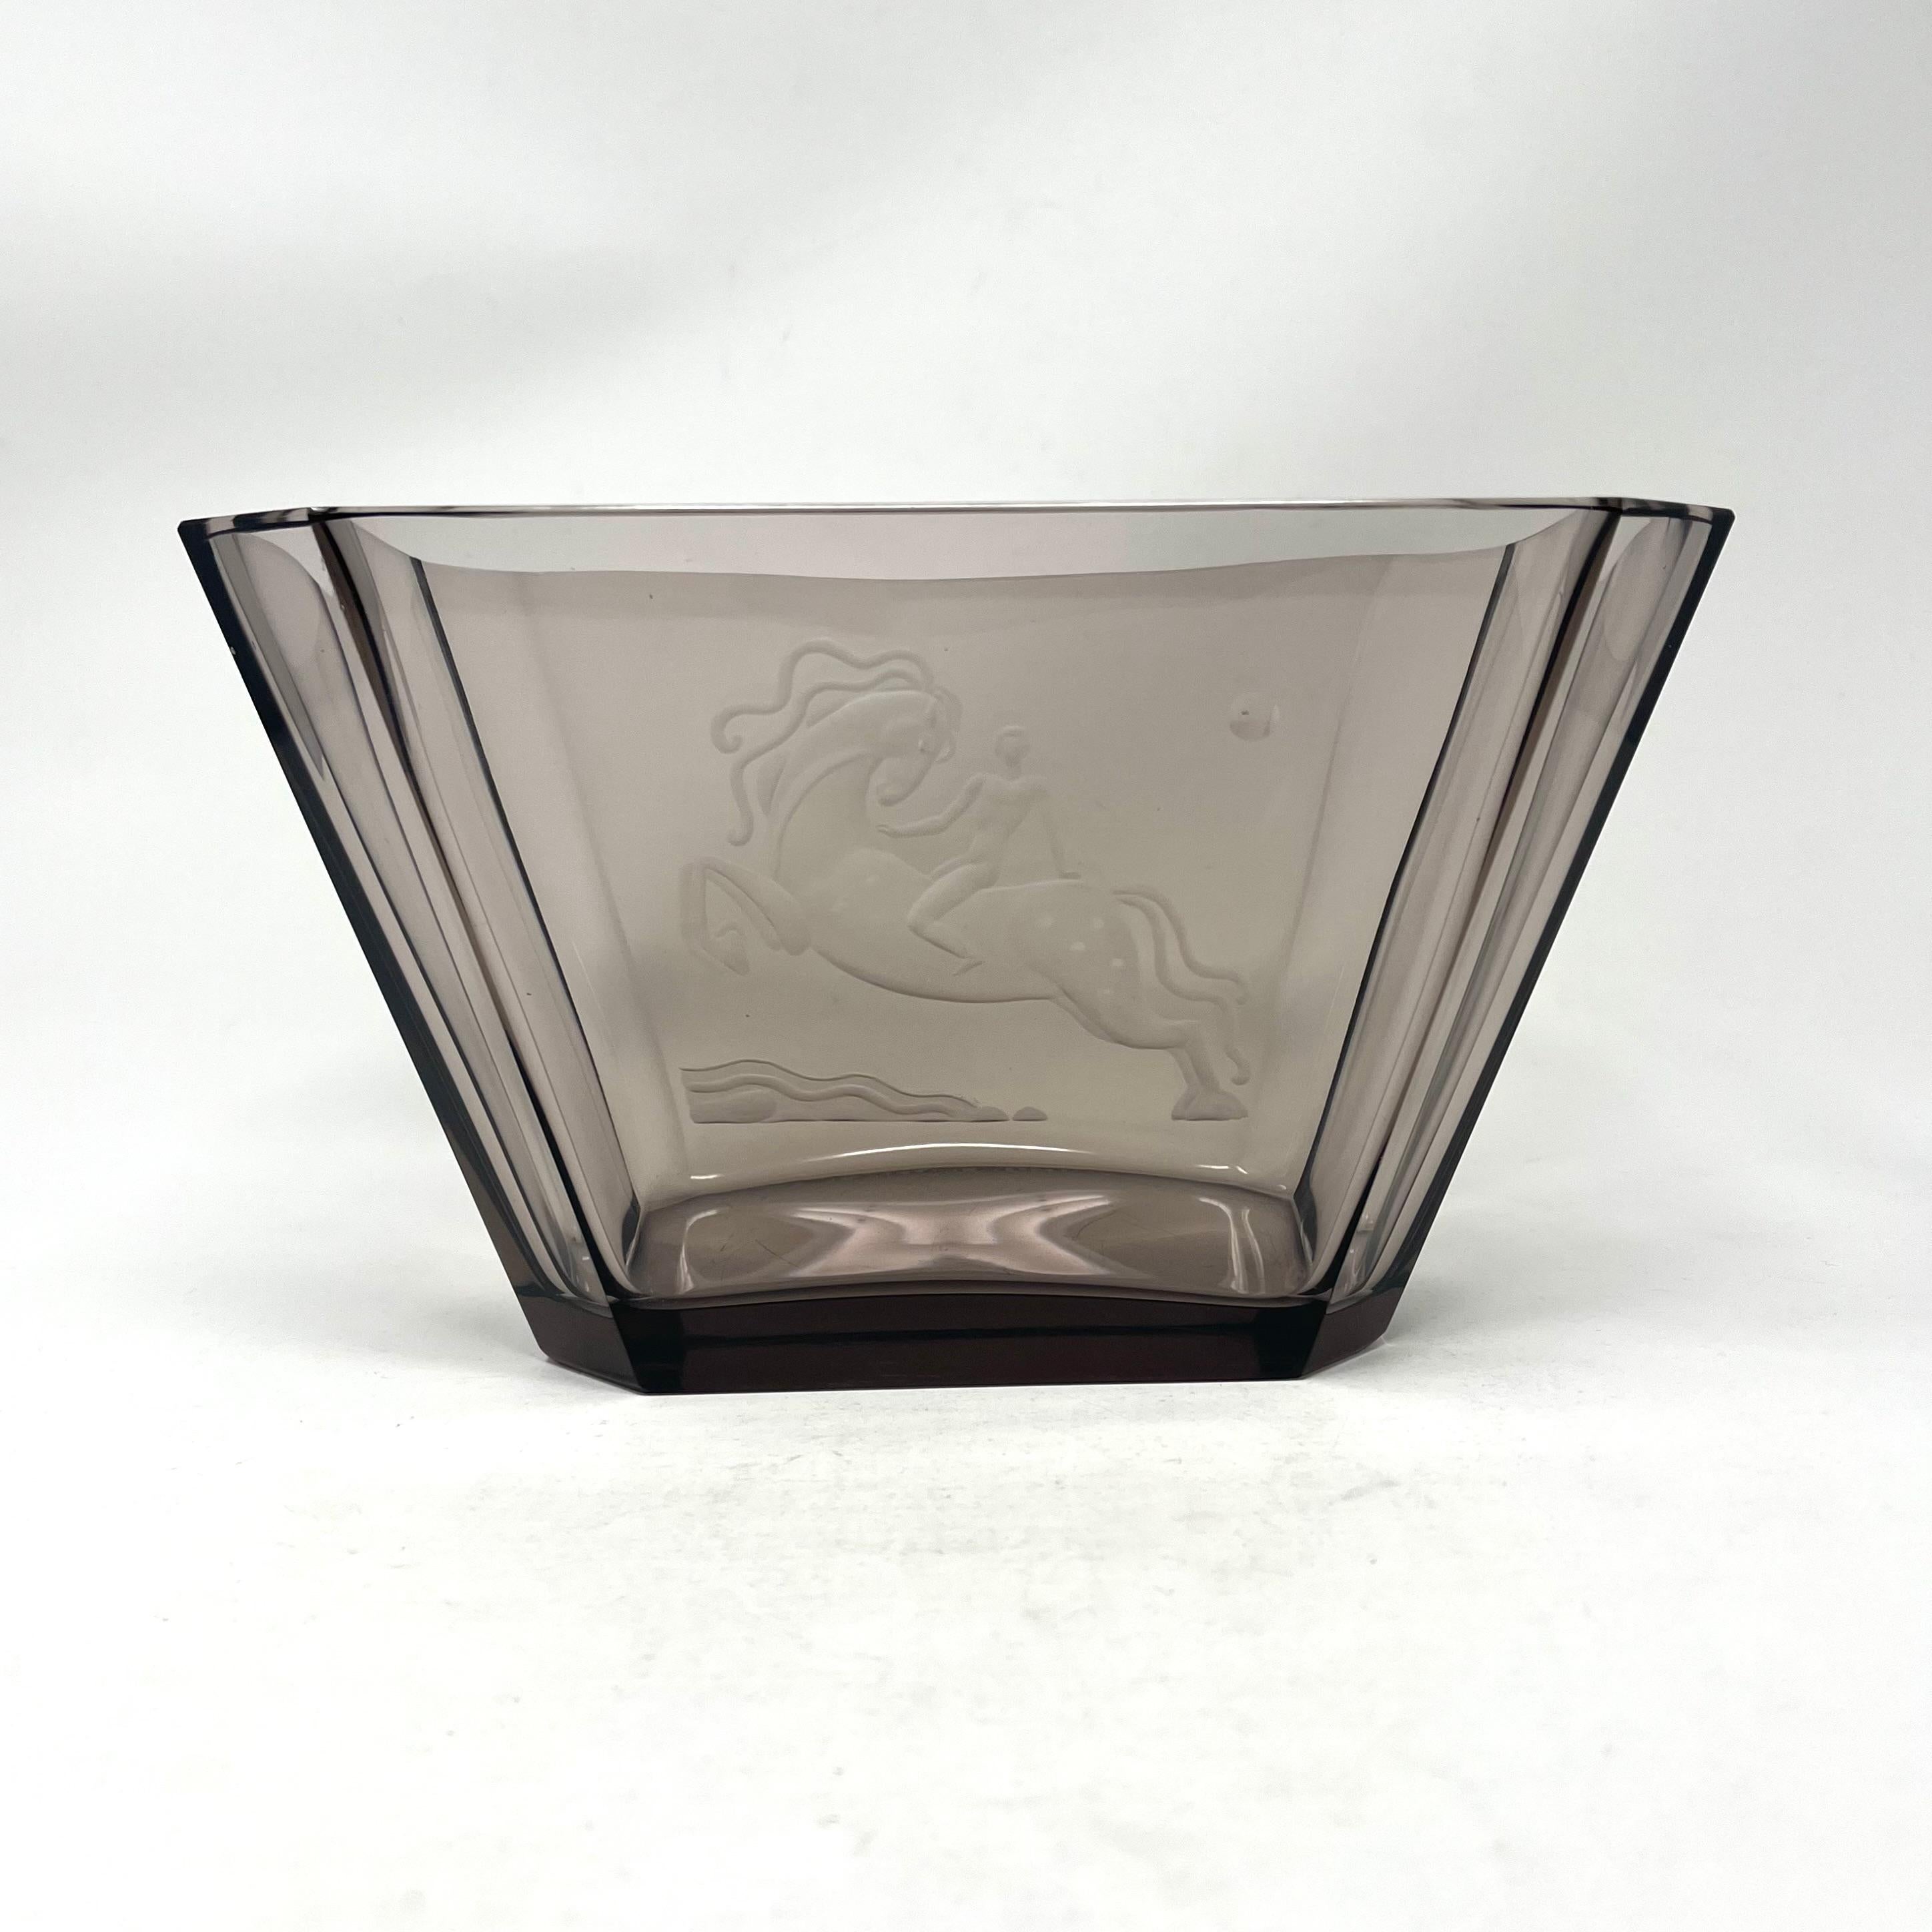 Vicke Lindstrand engraved smoky coloured glass bowl with Art-Deco style horse and rider and moon. For Orrefors, Sweden c1930s. Signature to base: Orrefors L. 1261 82.34. Engraved by Karl Rössler to the highest standard.

A superb piece of Art-Deco